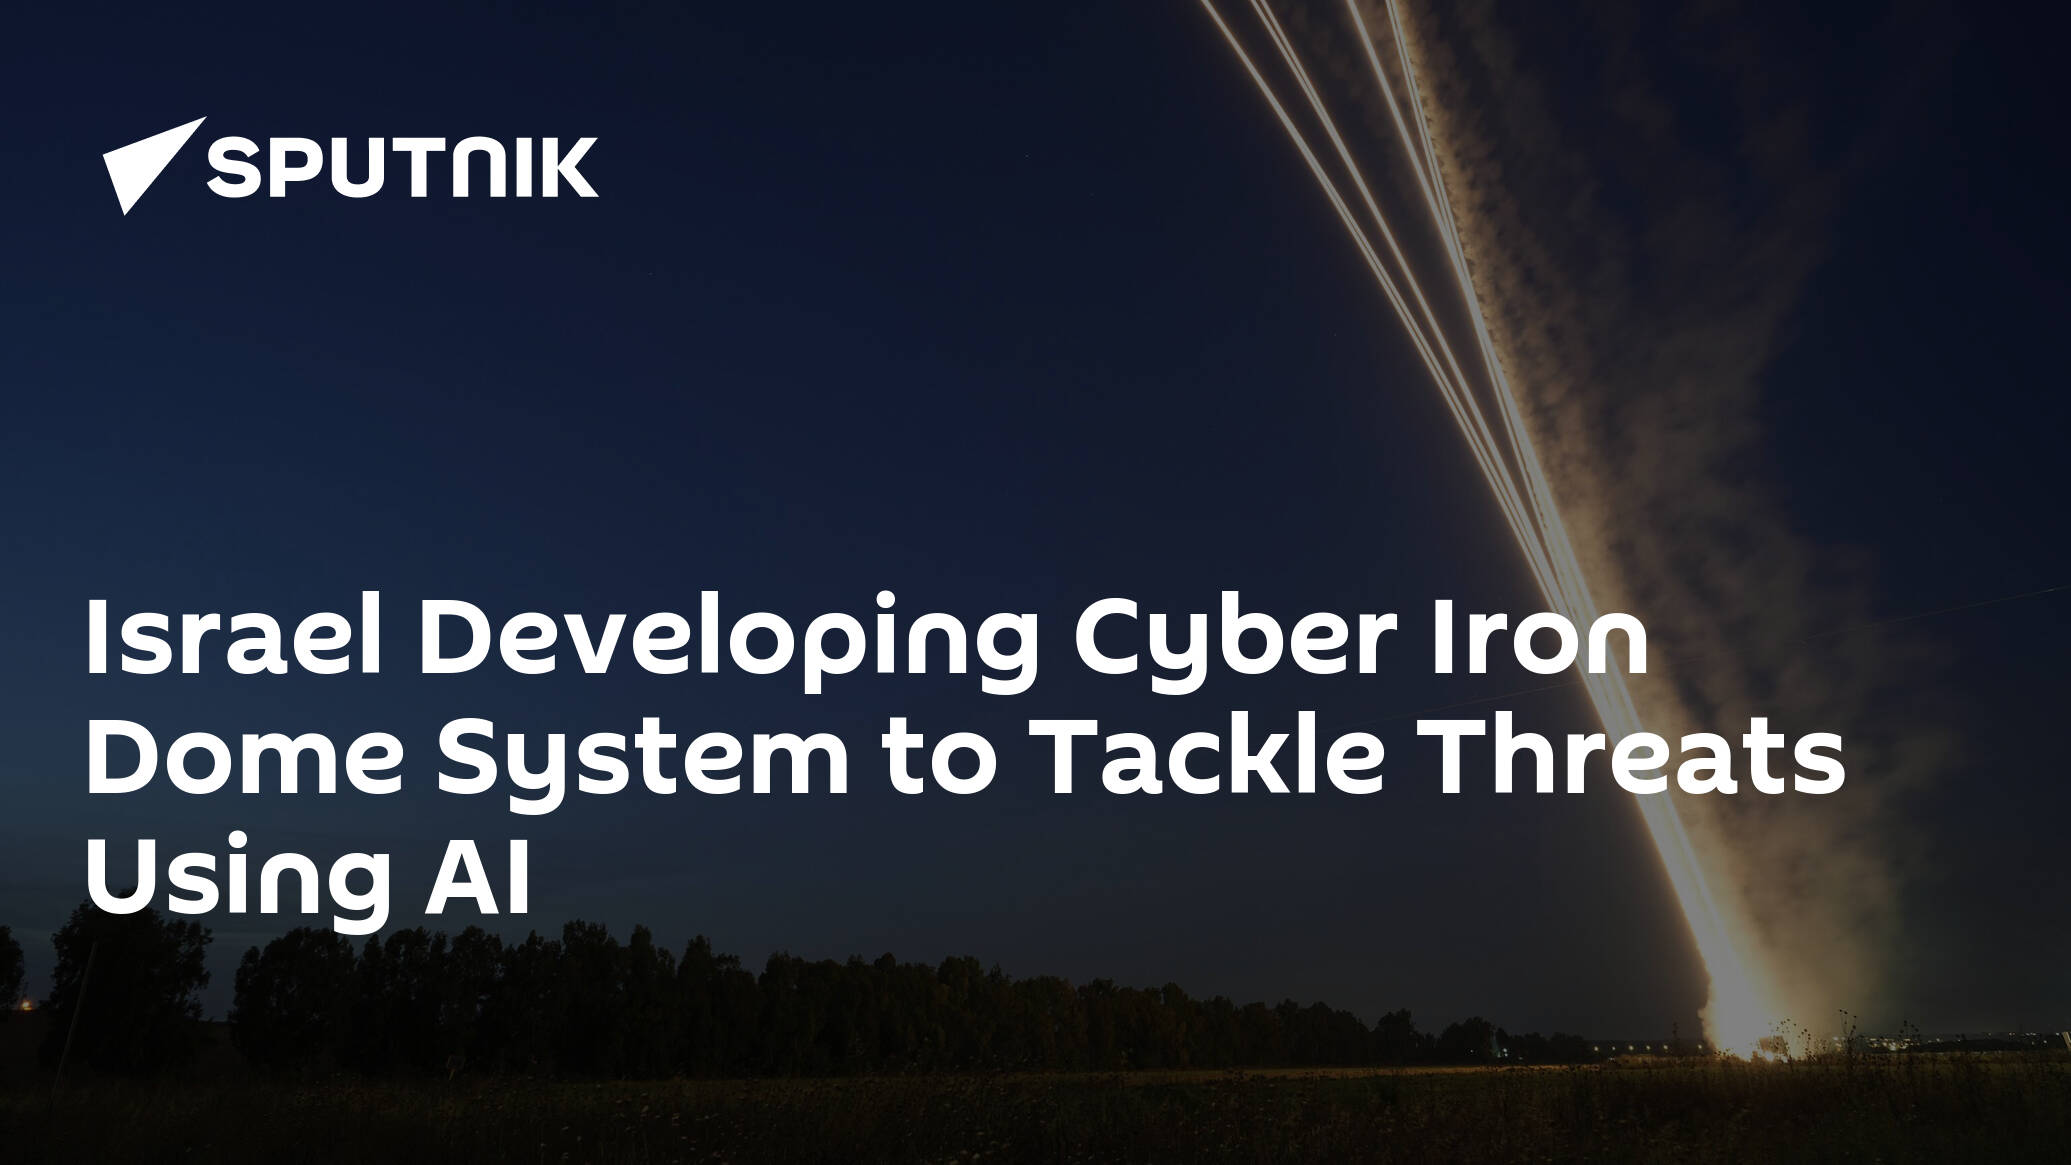 Israel Developing Cyber Iron Dome System to Tackle Threats Using AI